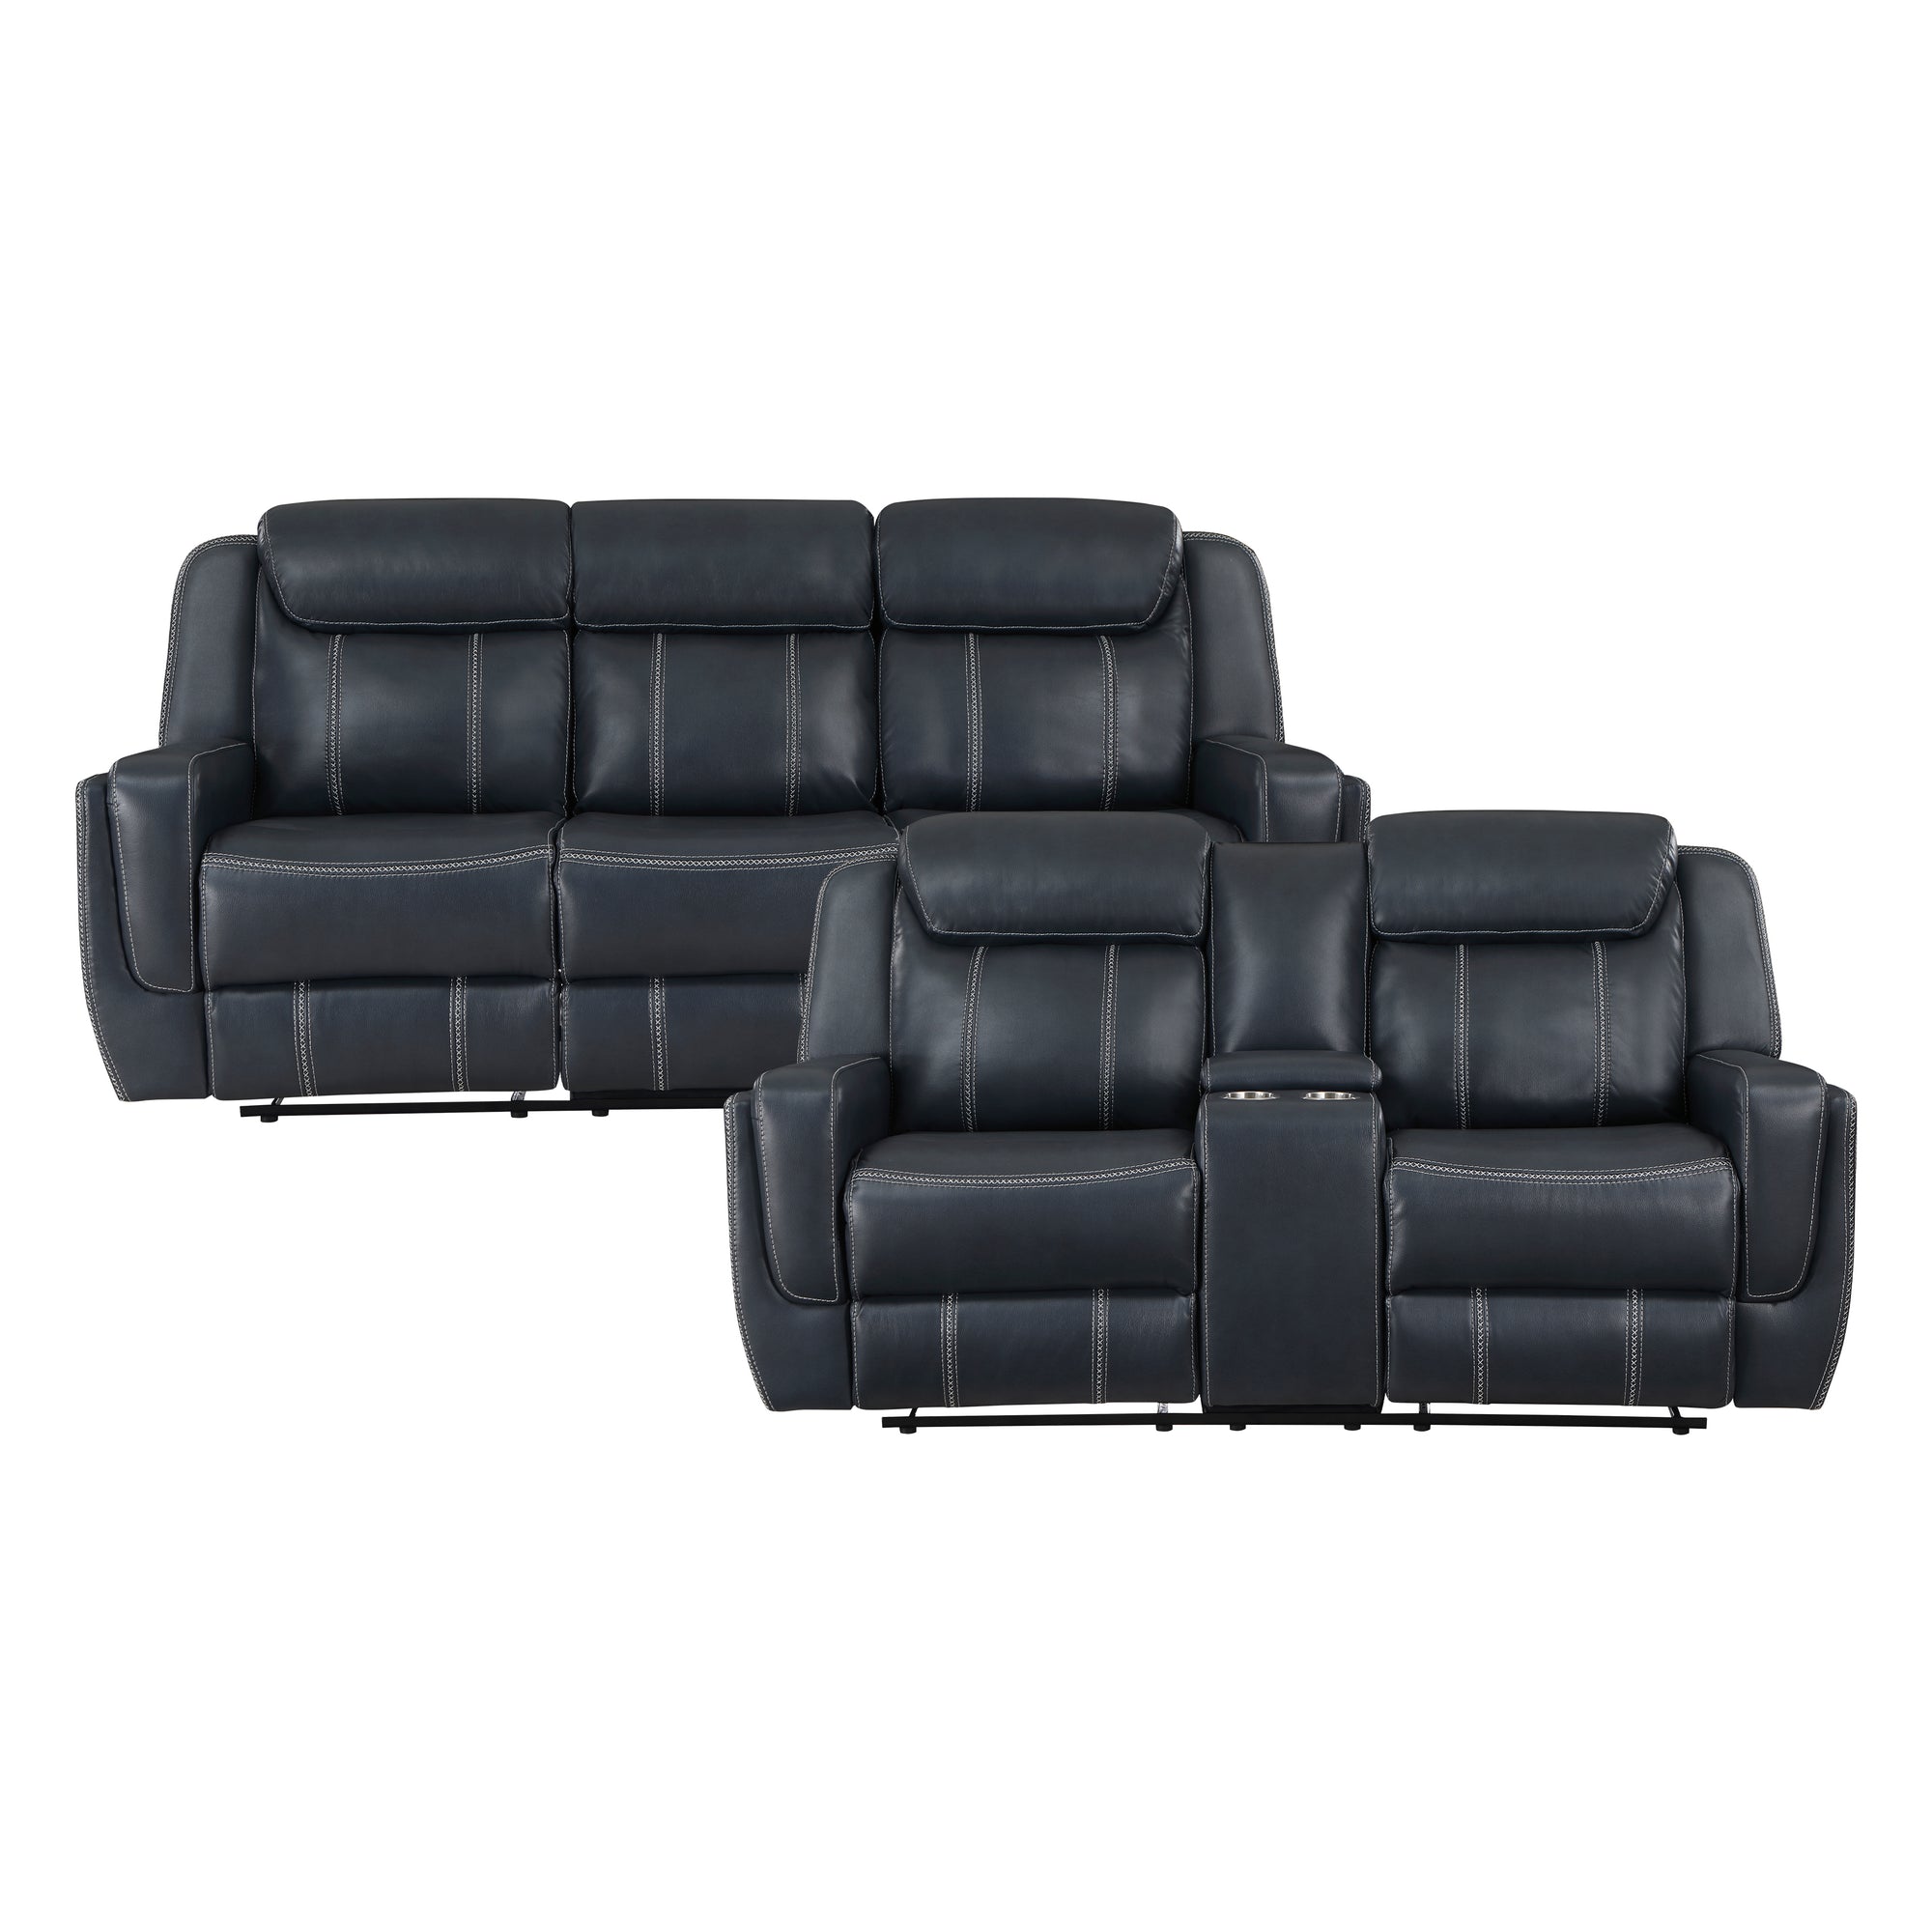 Manuel 2-Piece Breathable Faux Leather Manual Reclining Living Room Sofa Set